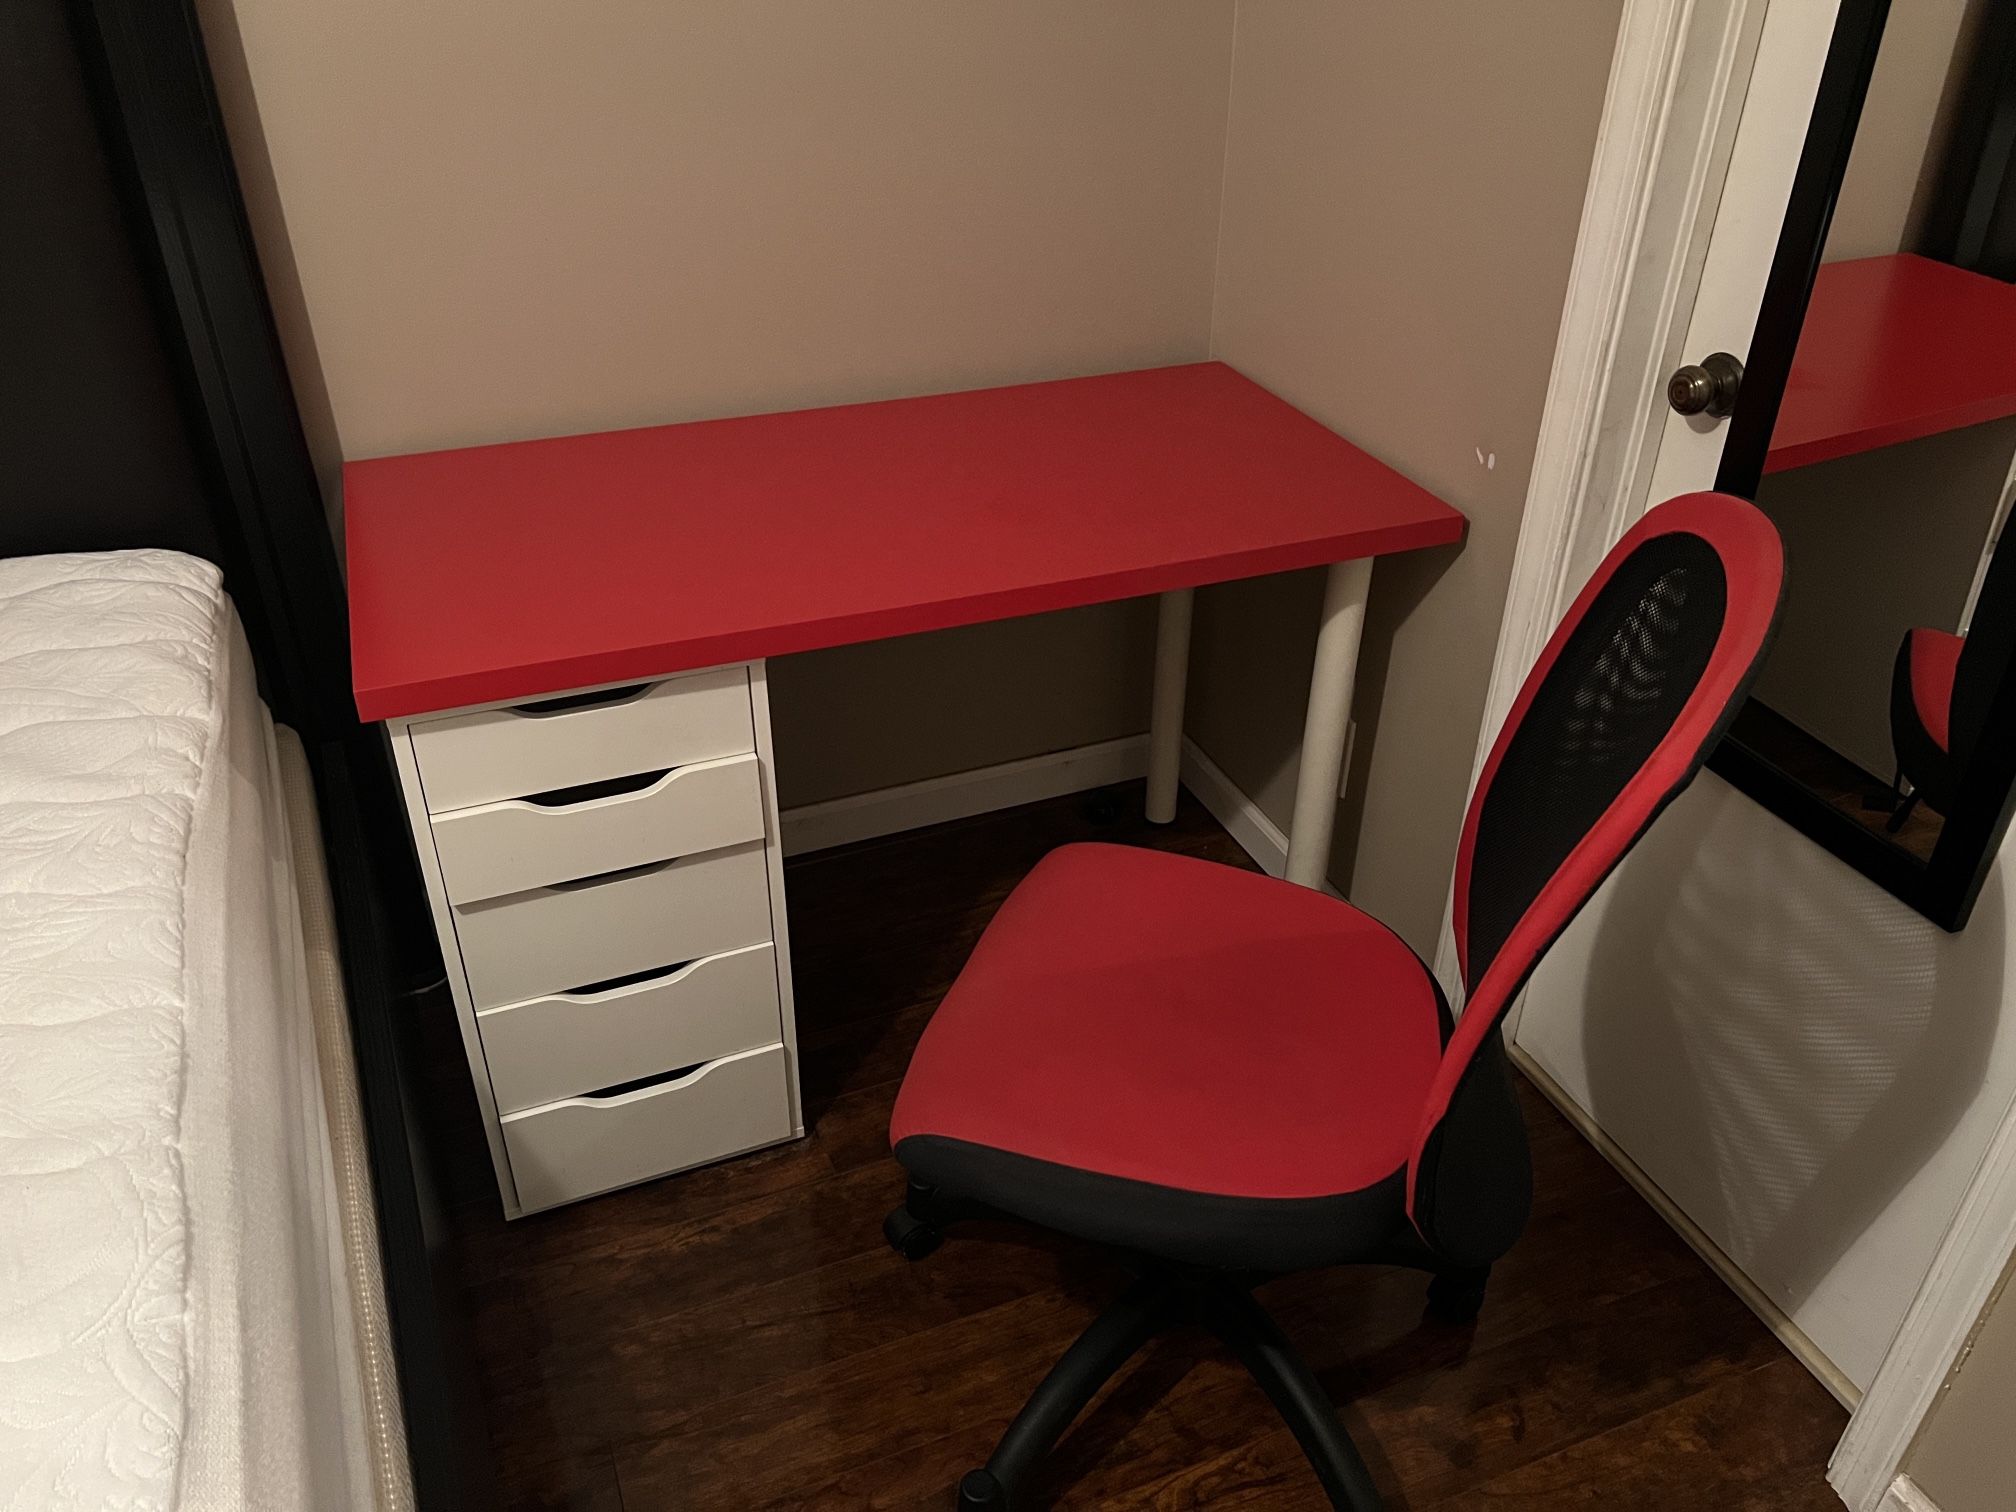 Ikea Desk with Drawers and Chair